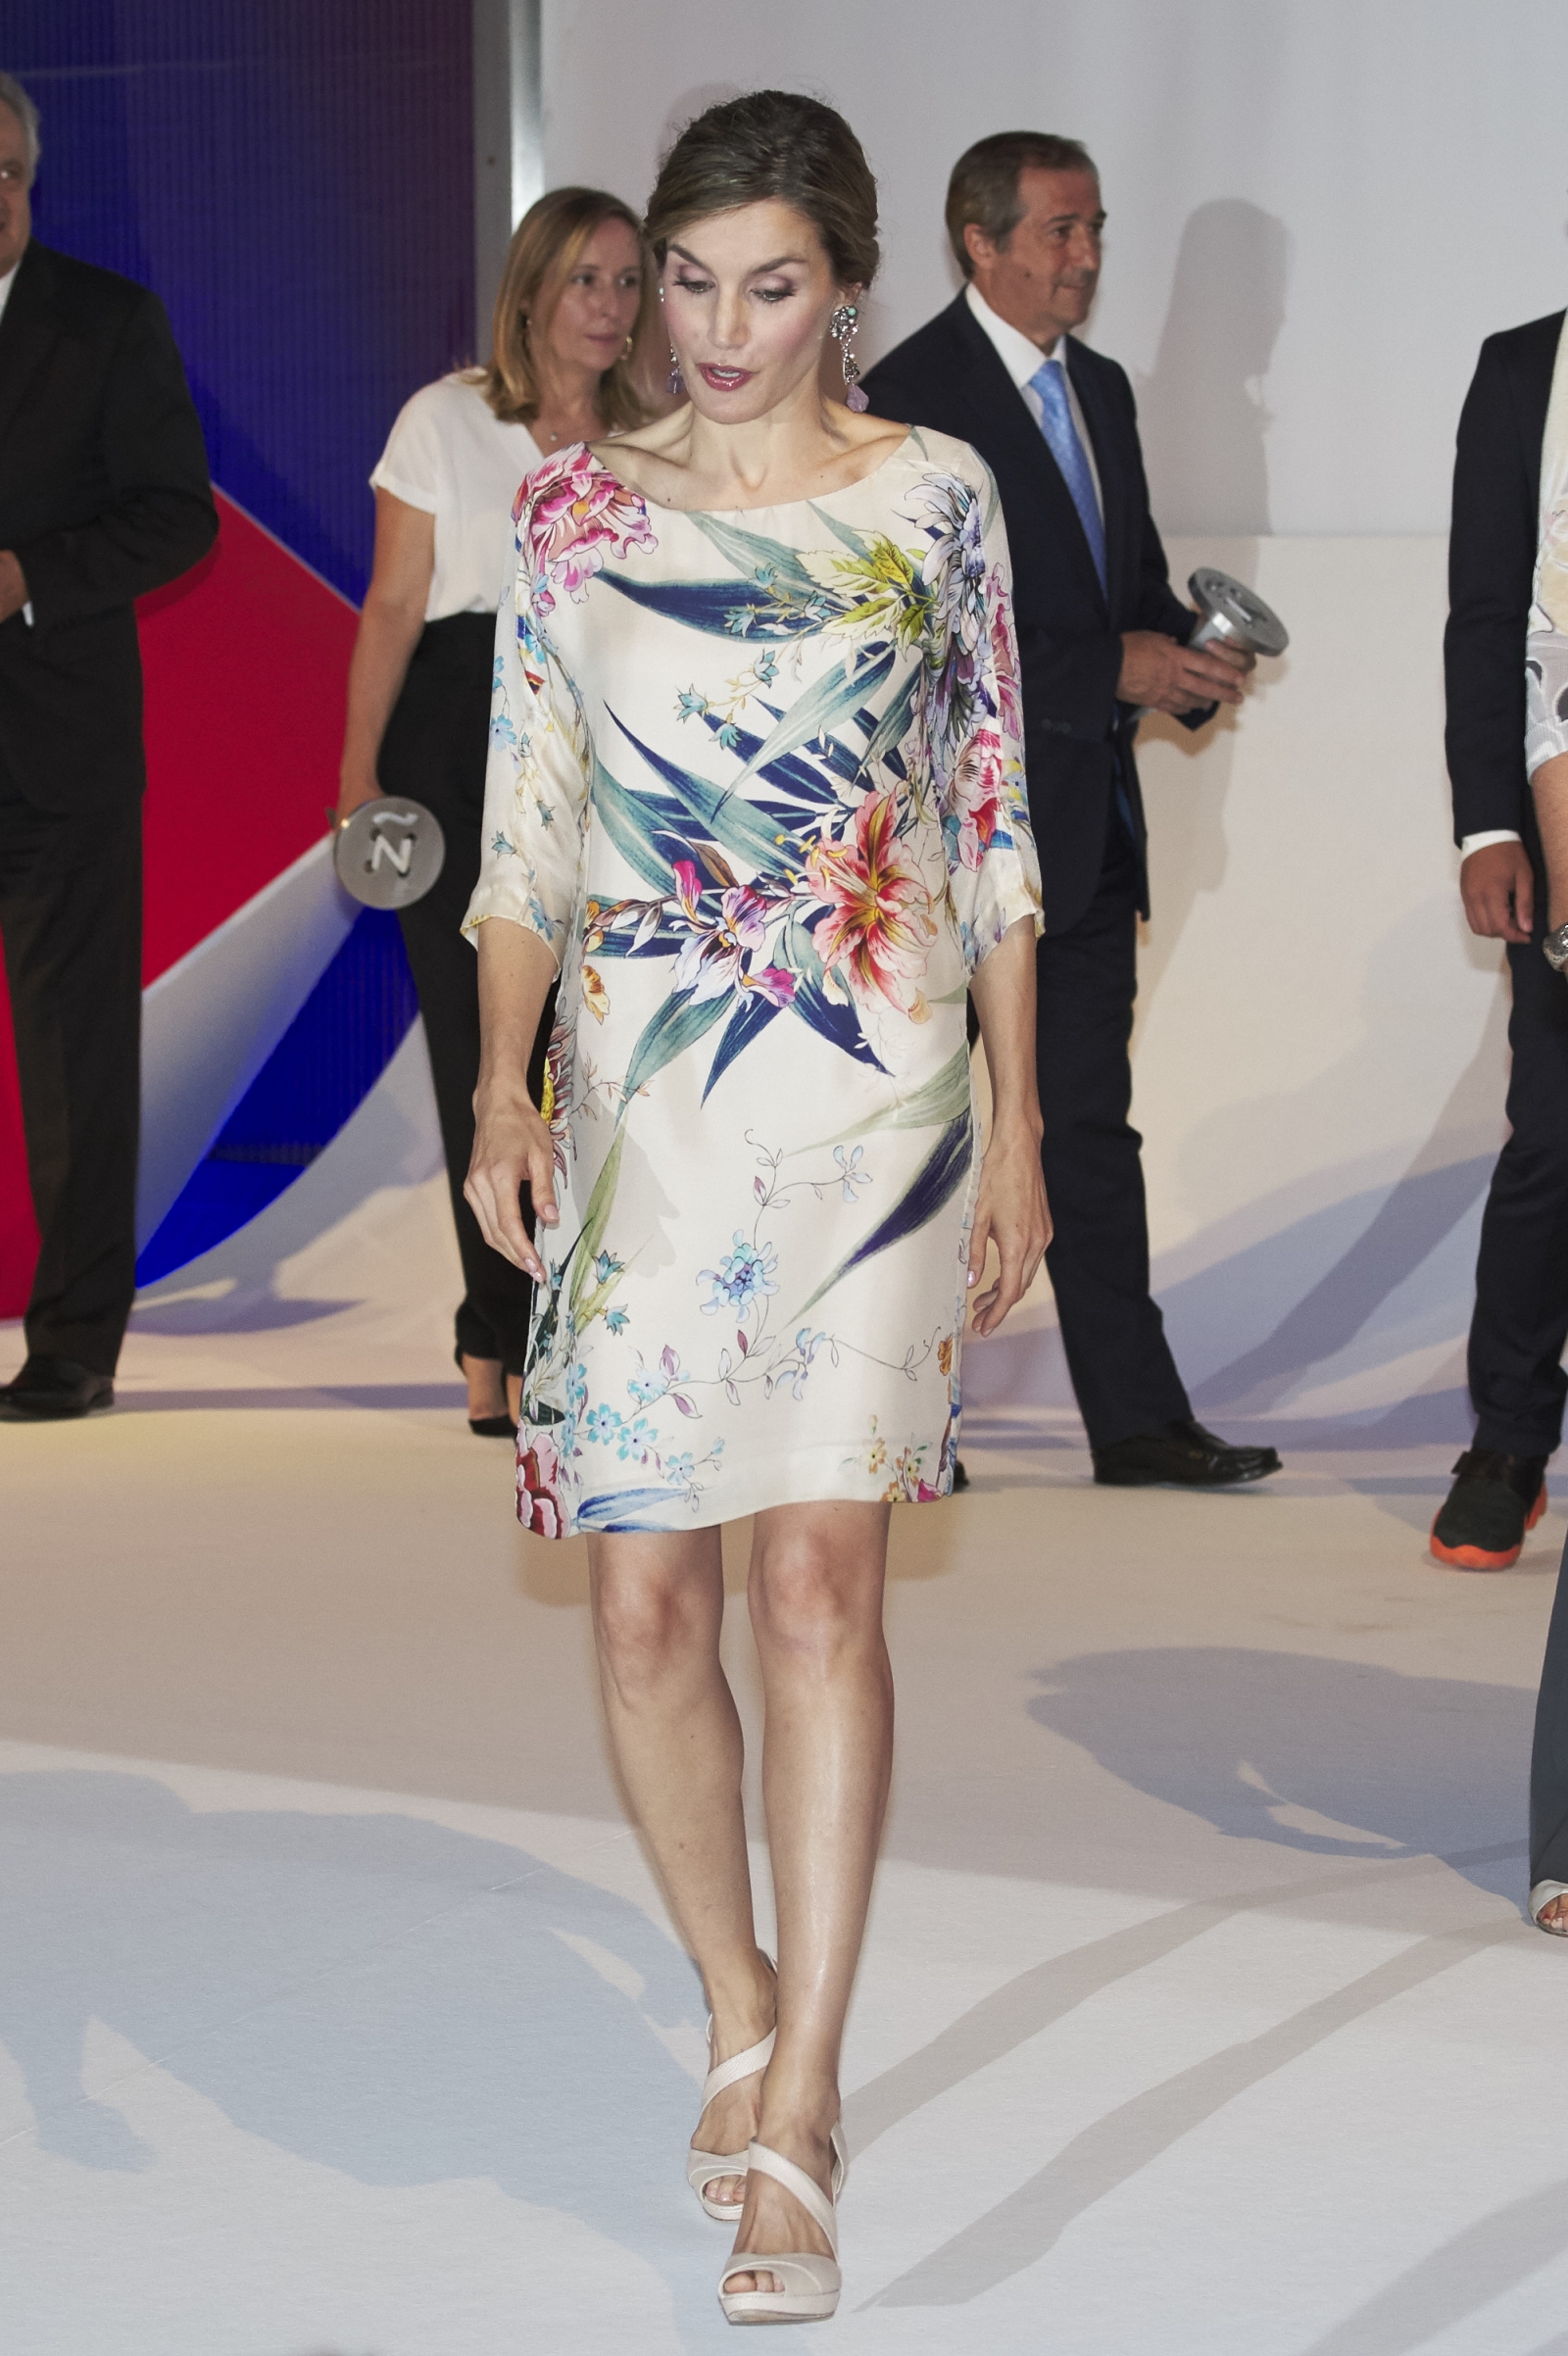 Queen Letizia of Spain hosts National Fashion Awards in recycled Zara dress